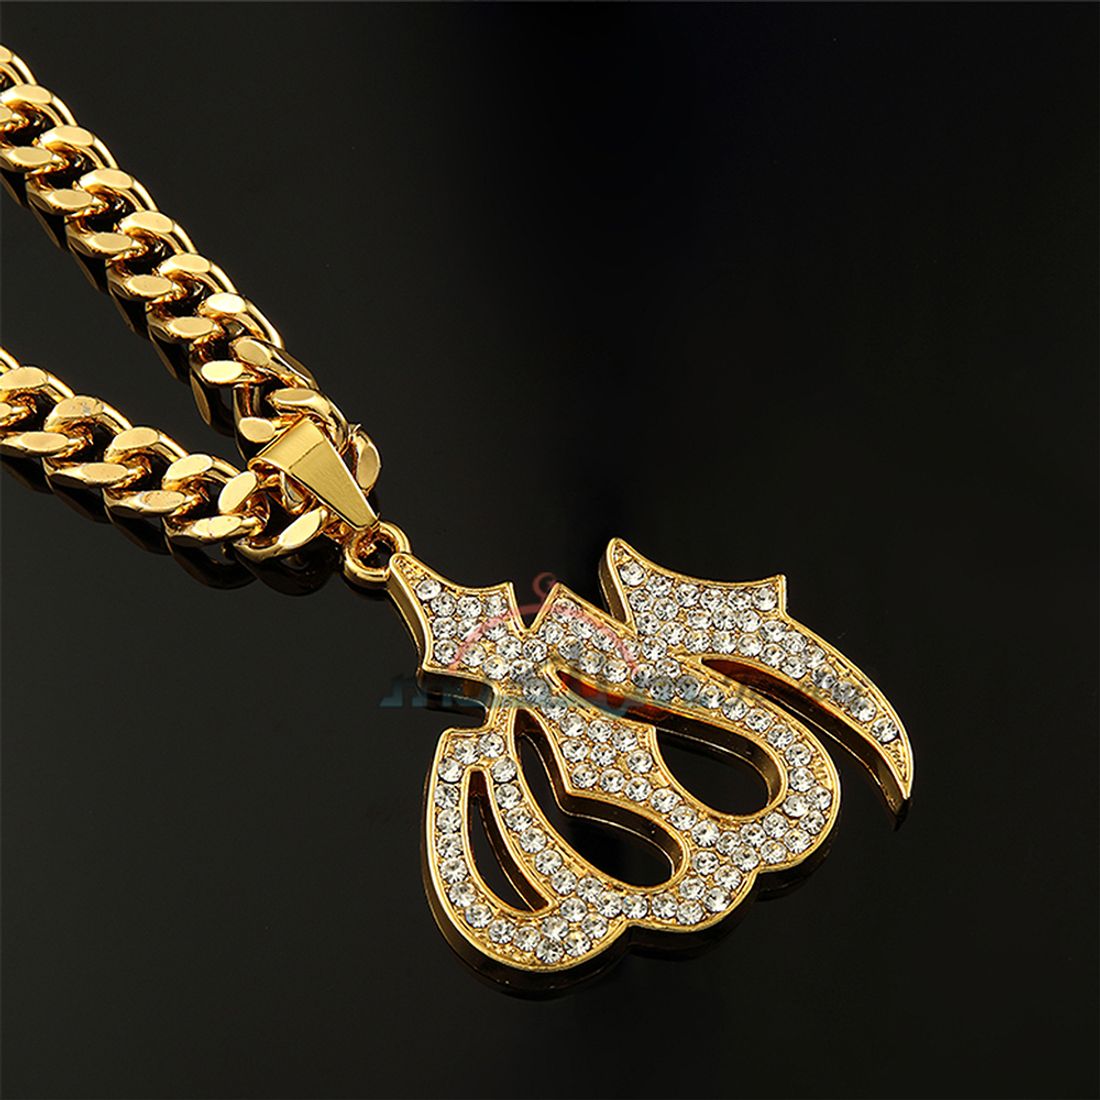 Large Gold Tone Allah Pendant With Rhinestones with Chain